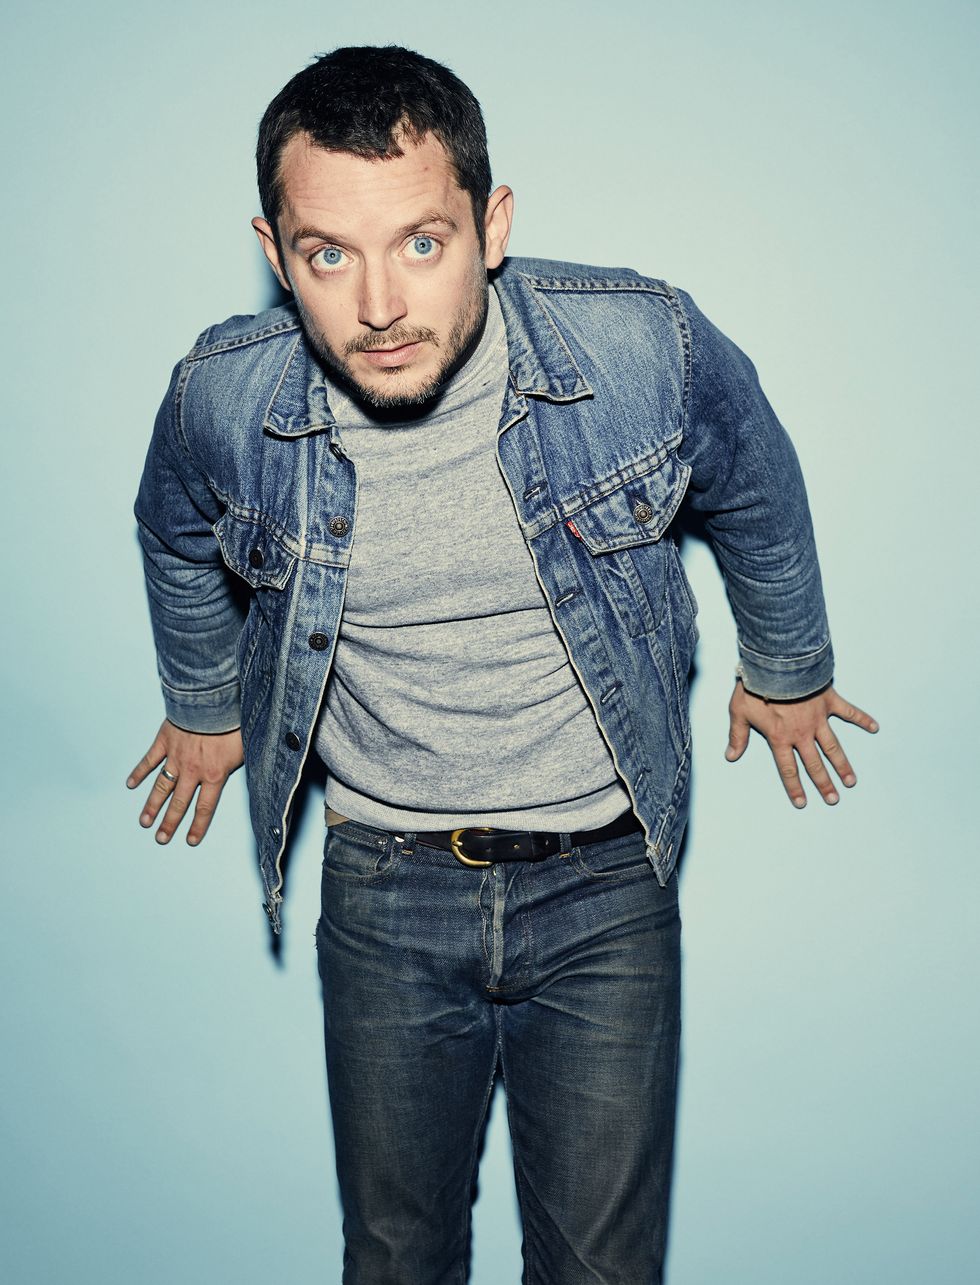 new york, ny   april 21  elijah wood of the production company company x poses for a portrait during the 2018 tribeca film festival at spring studio on april 21, 2018 in new york city  photo by erik tannercontour by getty images